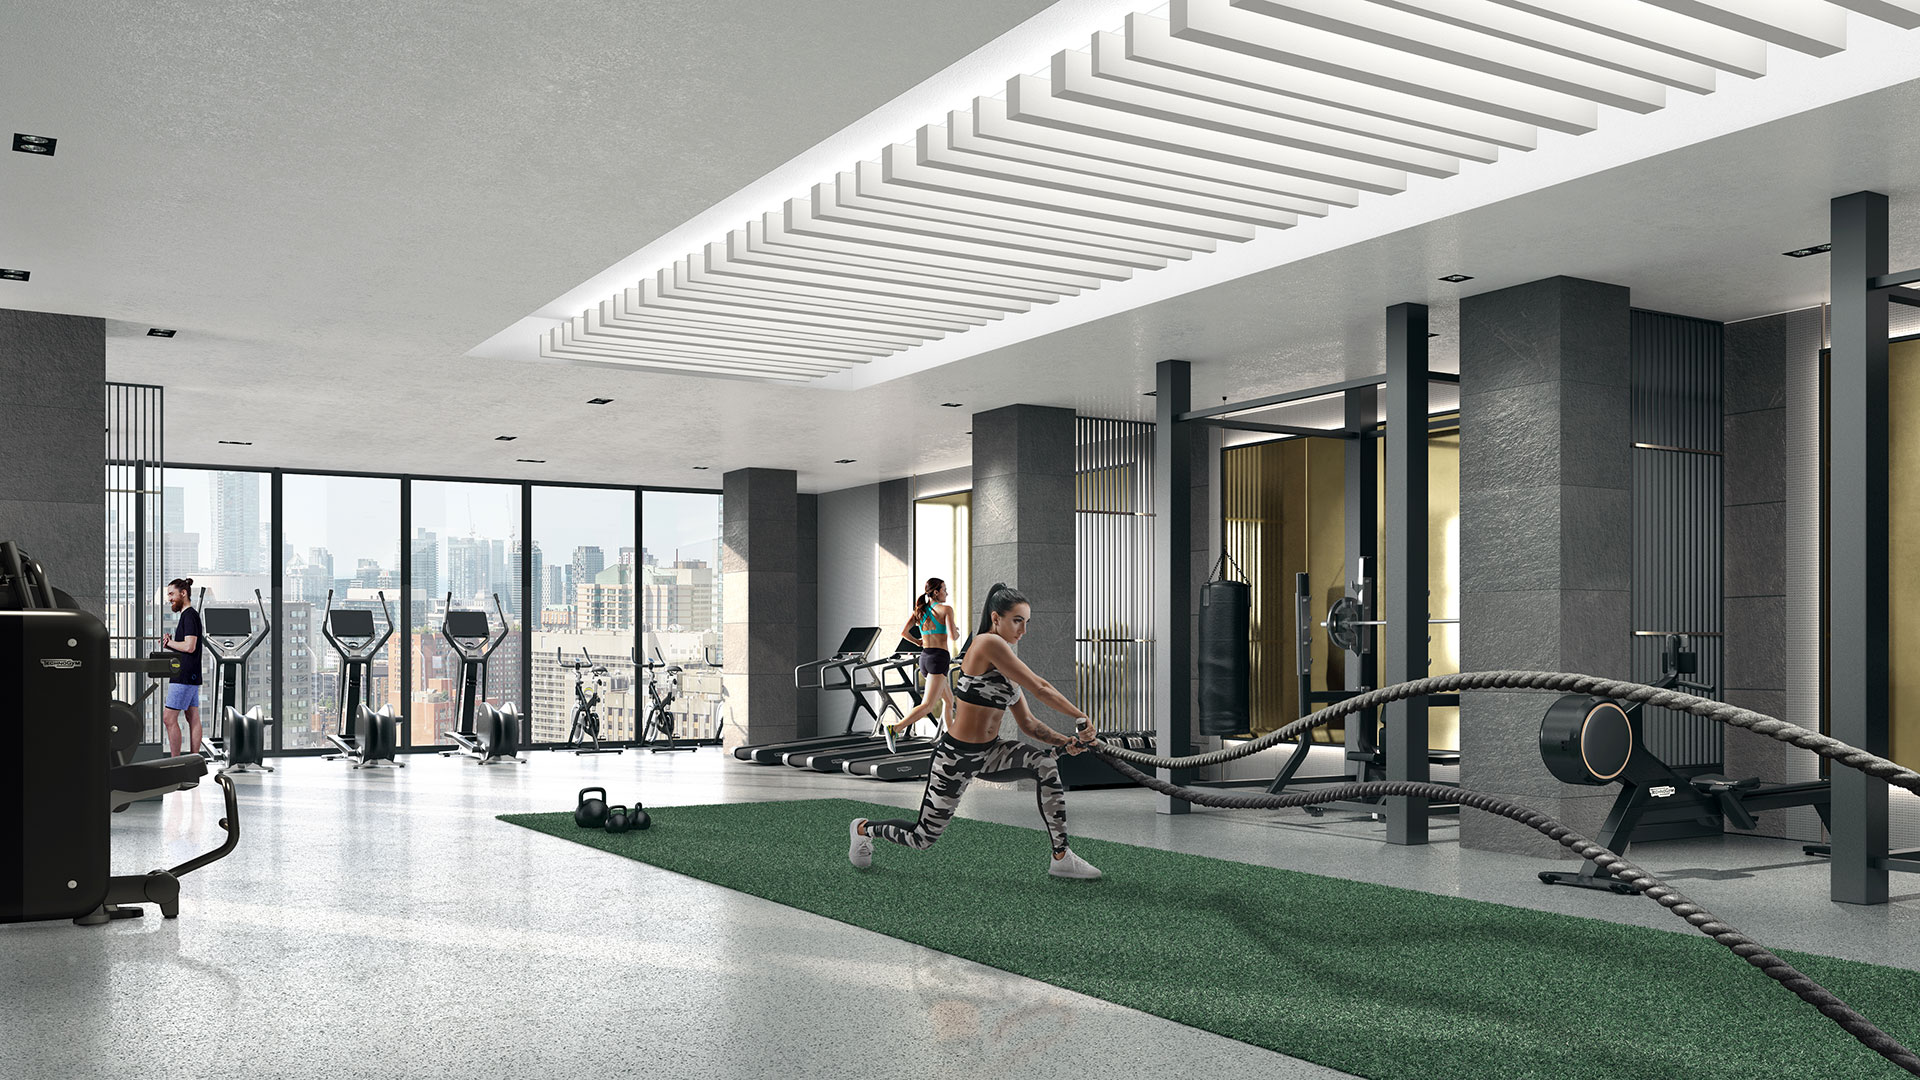 A premiere fitness club at your doorstep